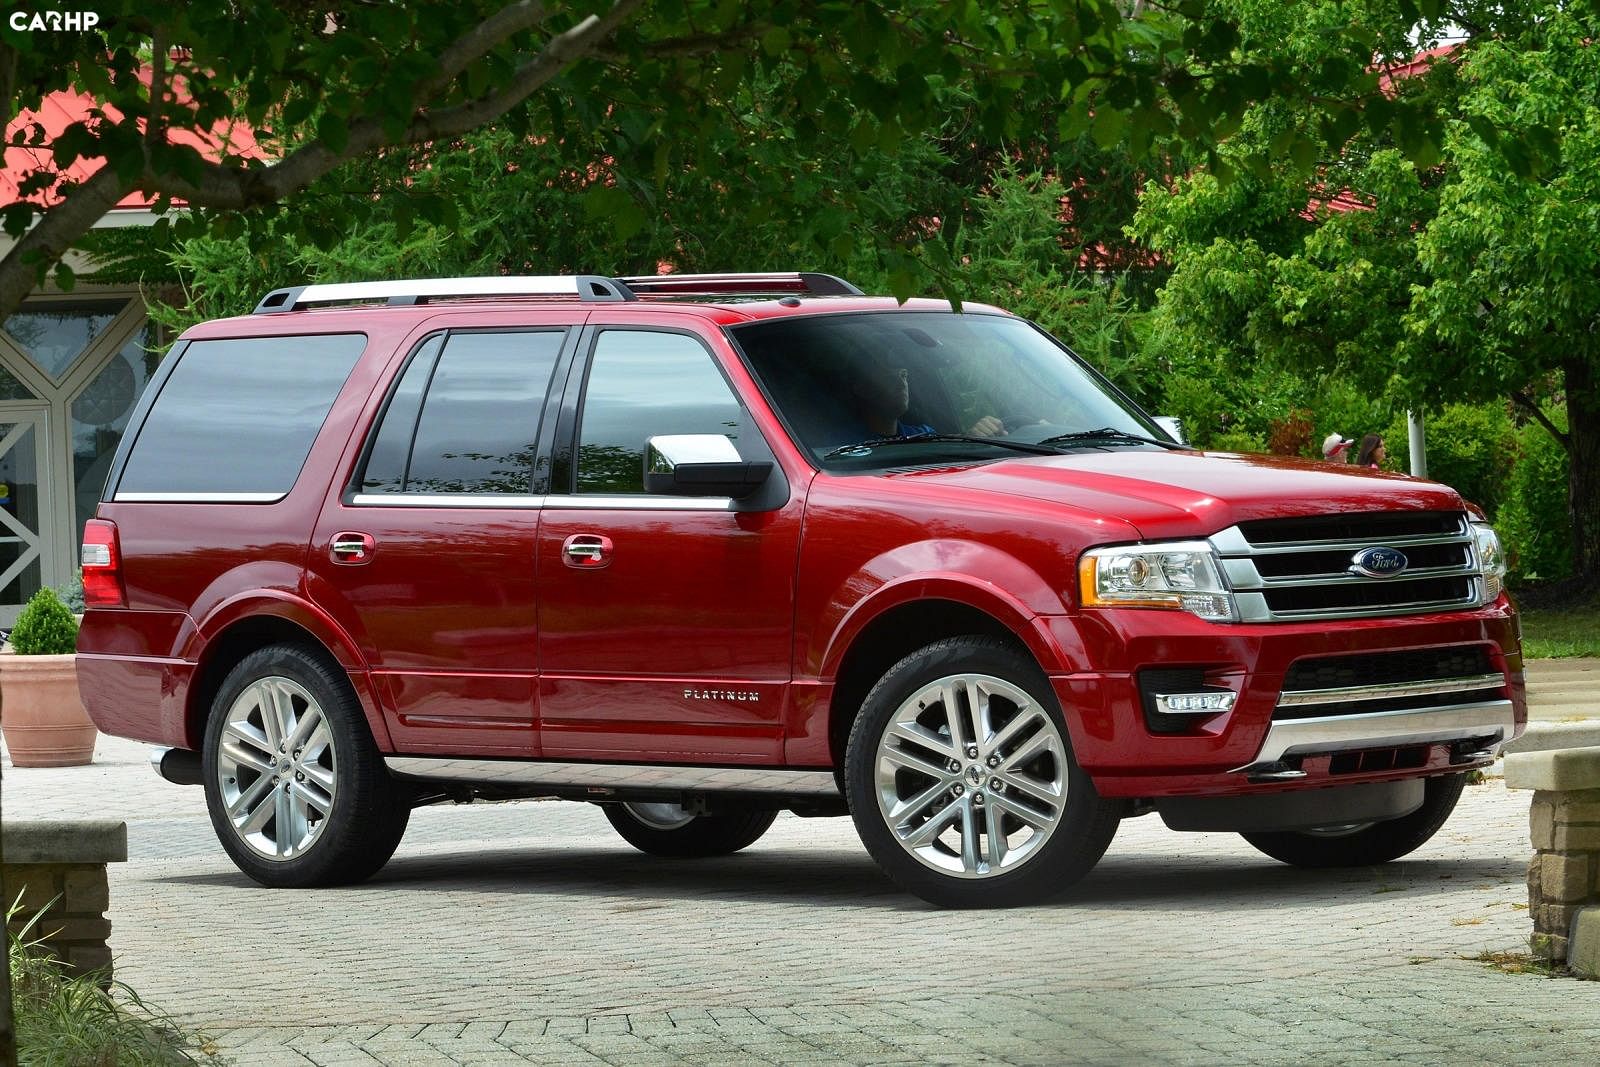 2017 Ford Expedition Problems and Complaints | CARHP